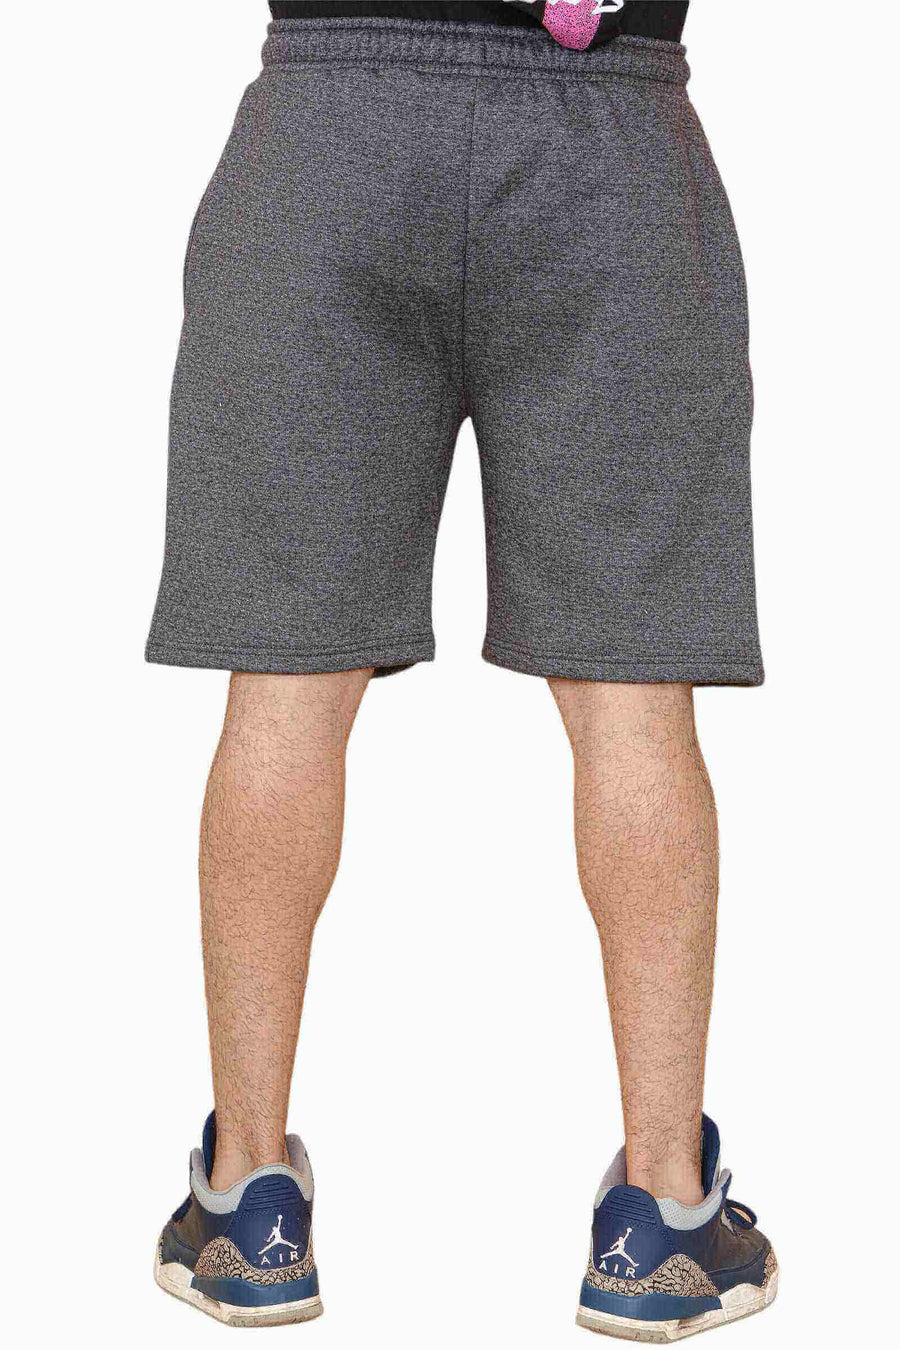 Back View of Men's Gym Shorts in Charcoal for Your Active Lifestyle